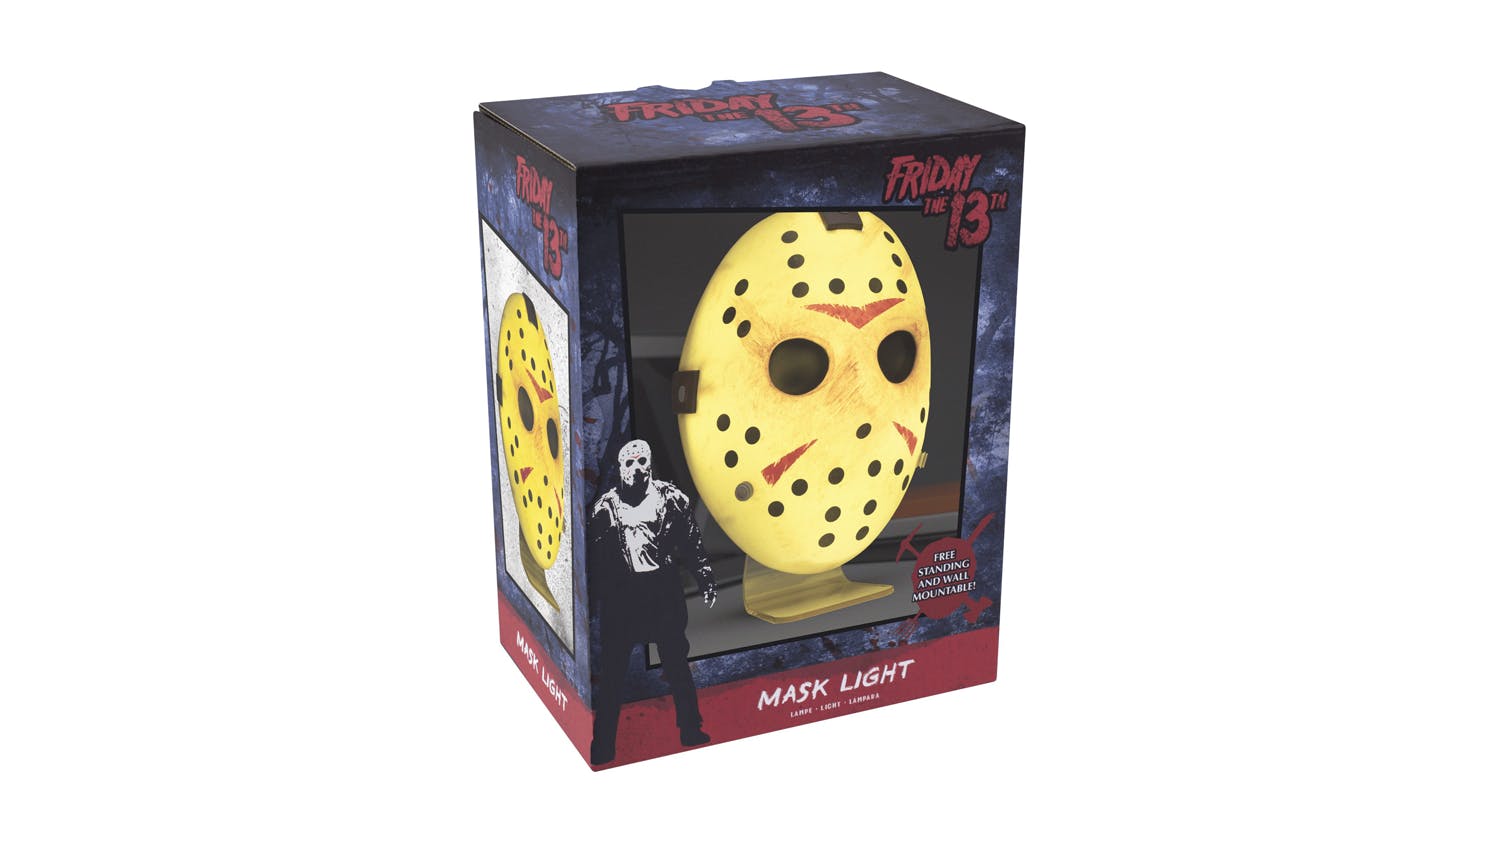  Paladone Friday The 13th Jason Mask Light - Officially Licensed  Merchandise : Home & Kitchen